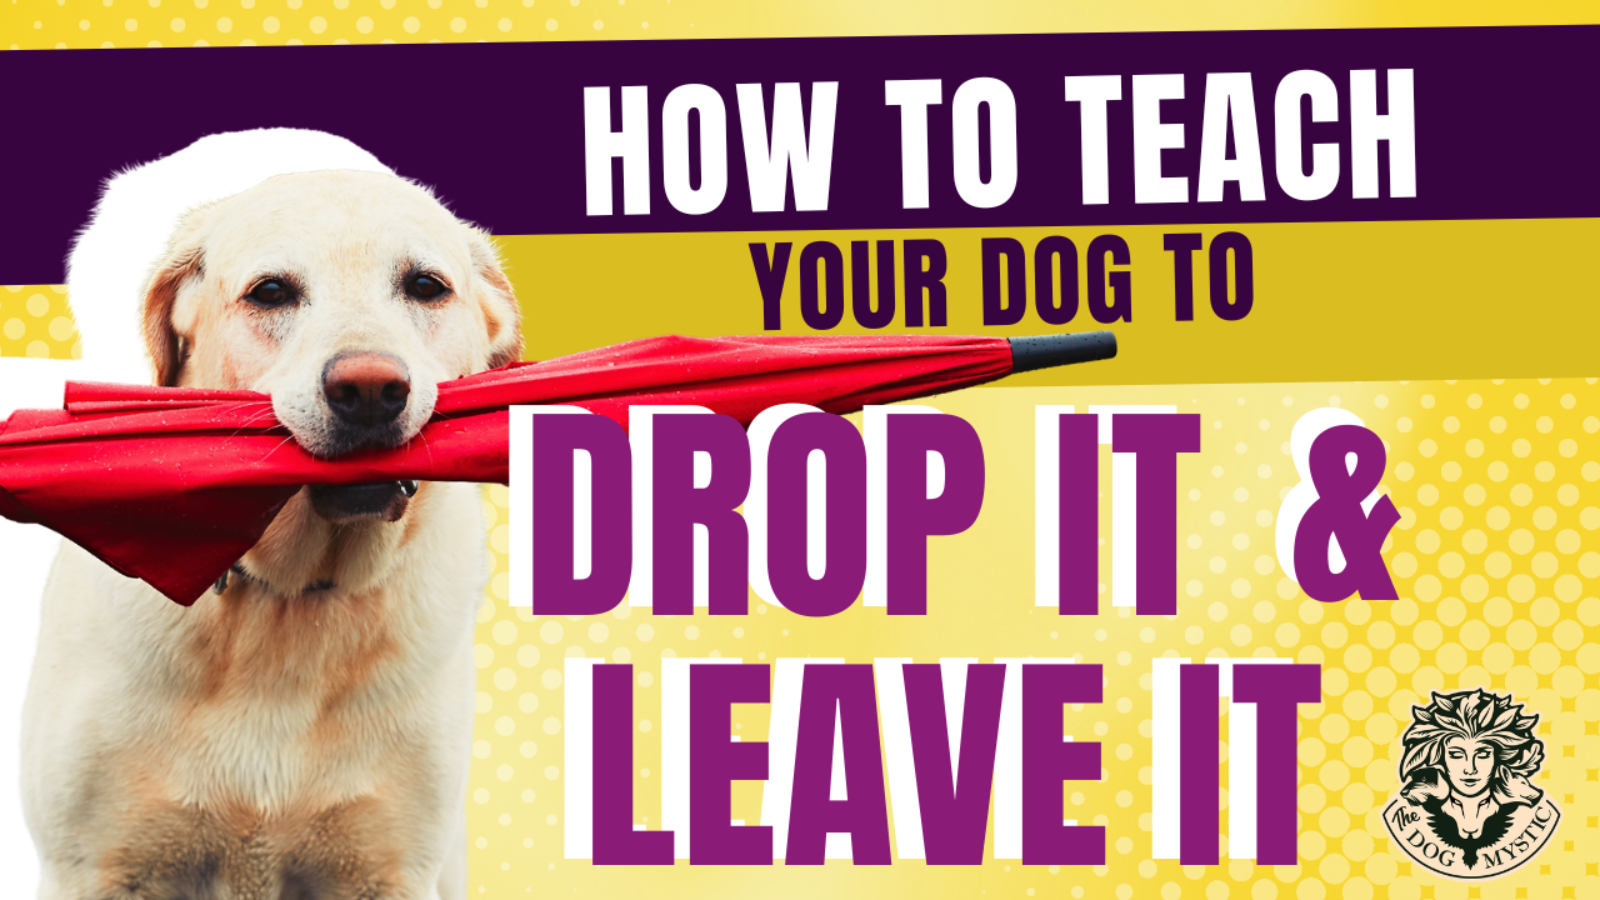 How To Teach Your Dog To DROP IT & LEAVE IT